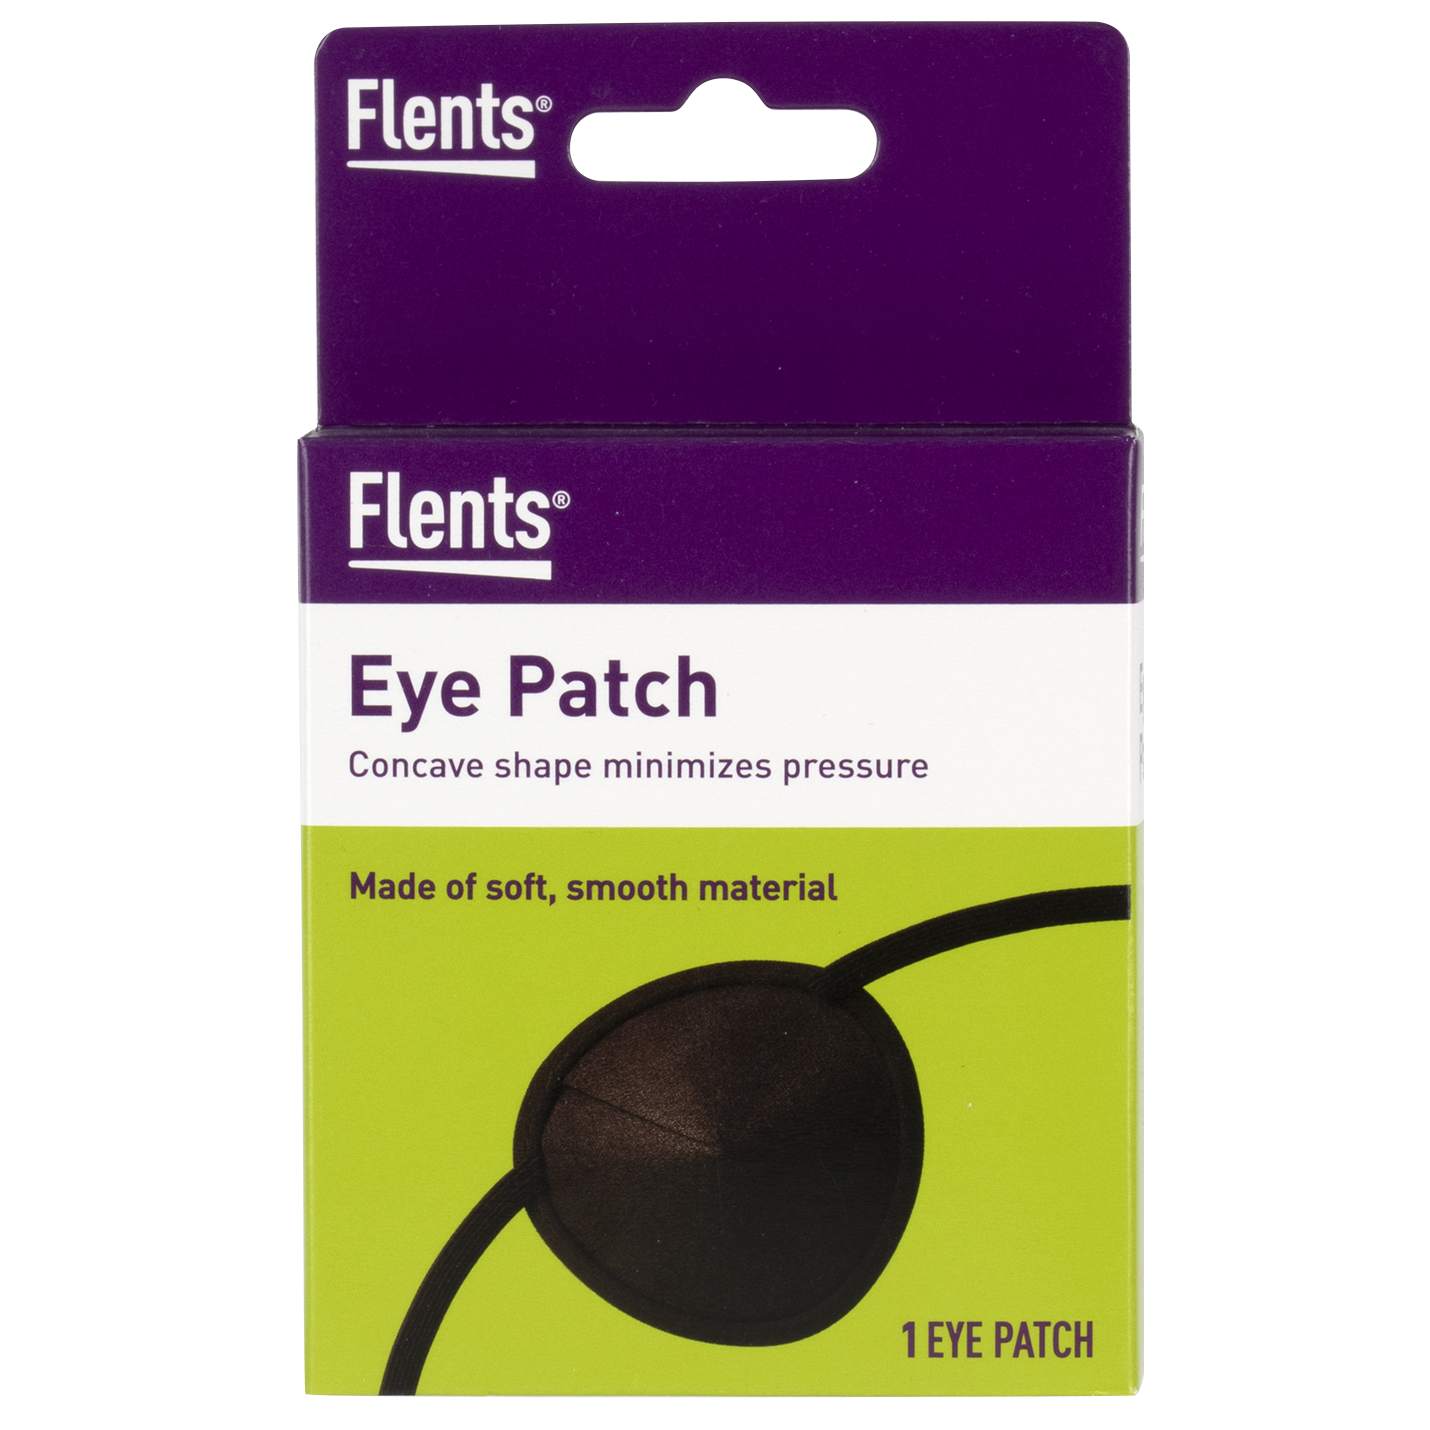 Front packaging of black eye patch